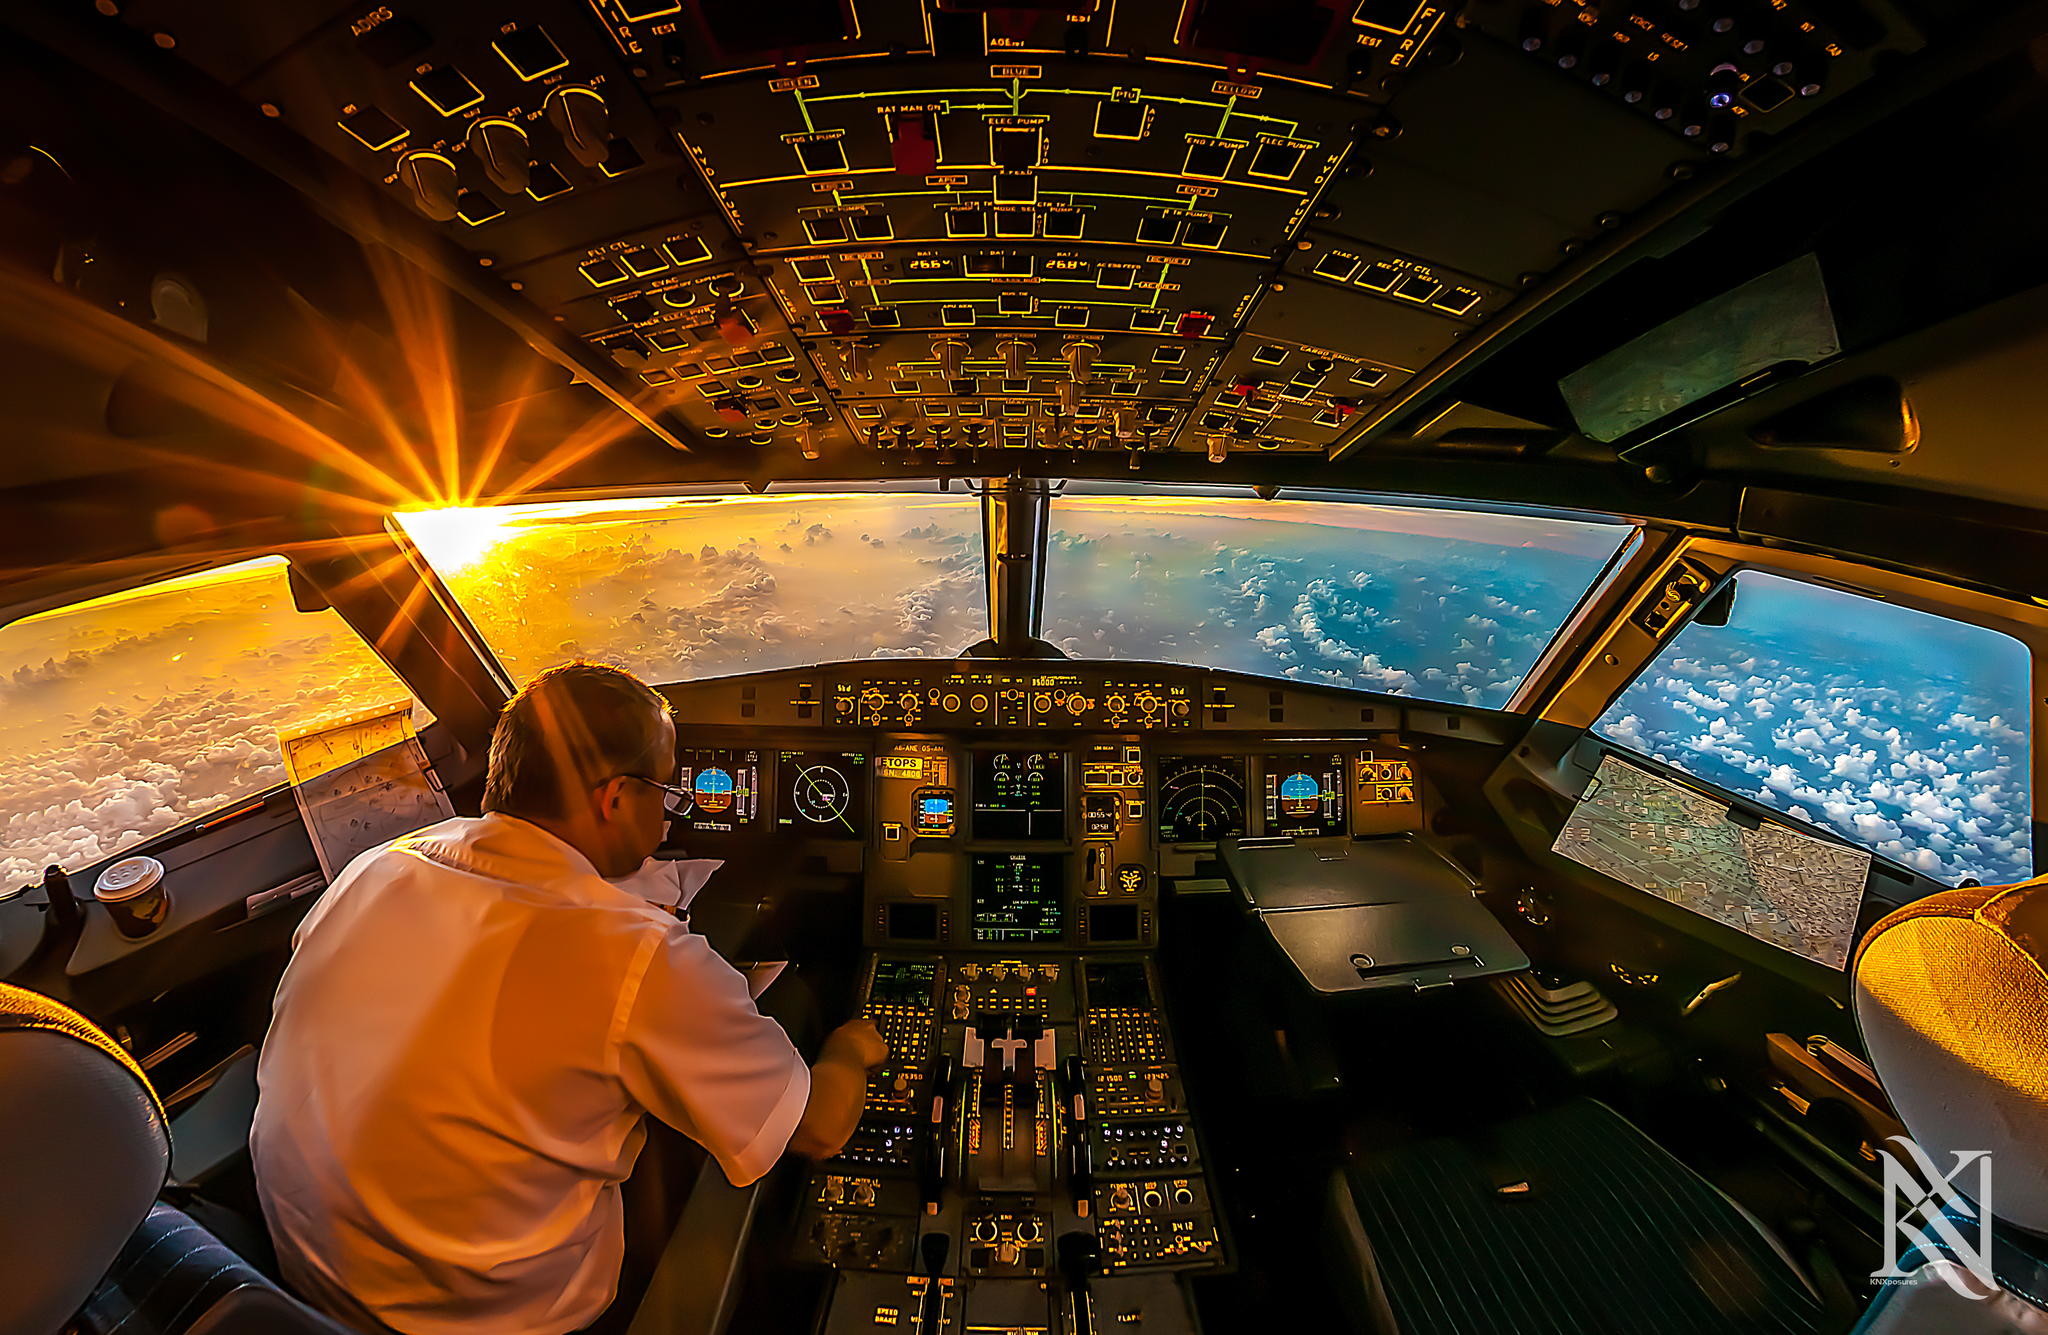 25 Awesome In Flight Photos Taken by Pilots from the Cockpit